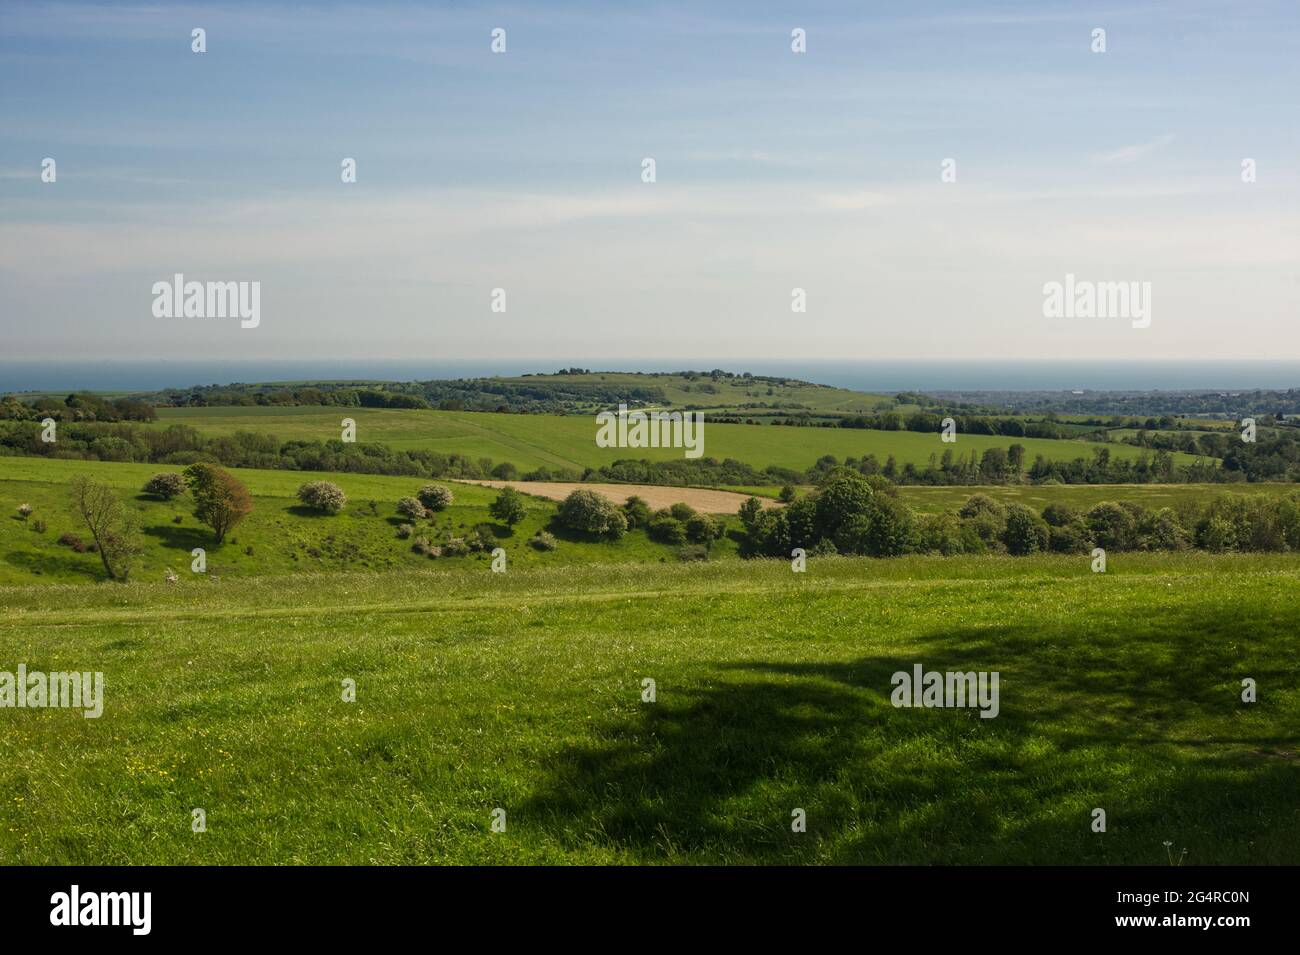 View South from Chanctonbury Hill on the South Downs near Worthing, West Sussex, England. With Cissbury Ring and coastline in background. Stock Photo